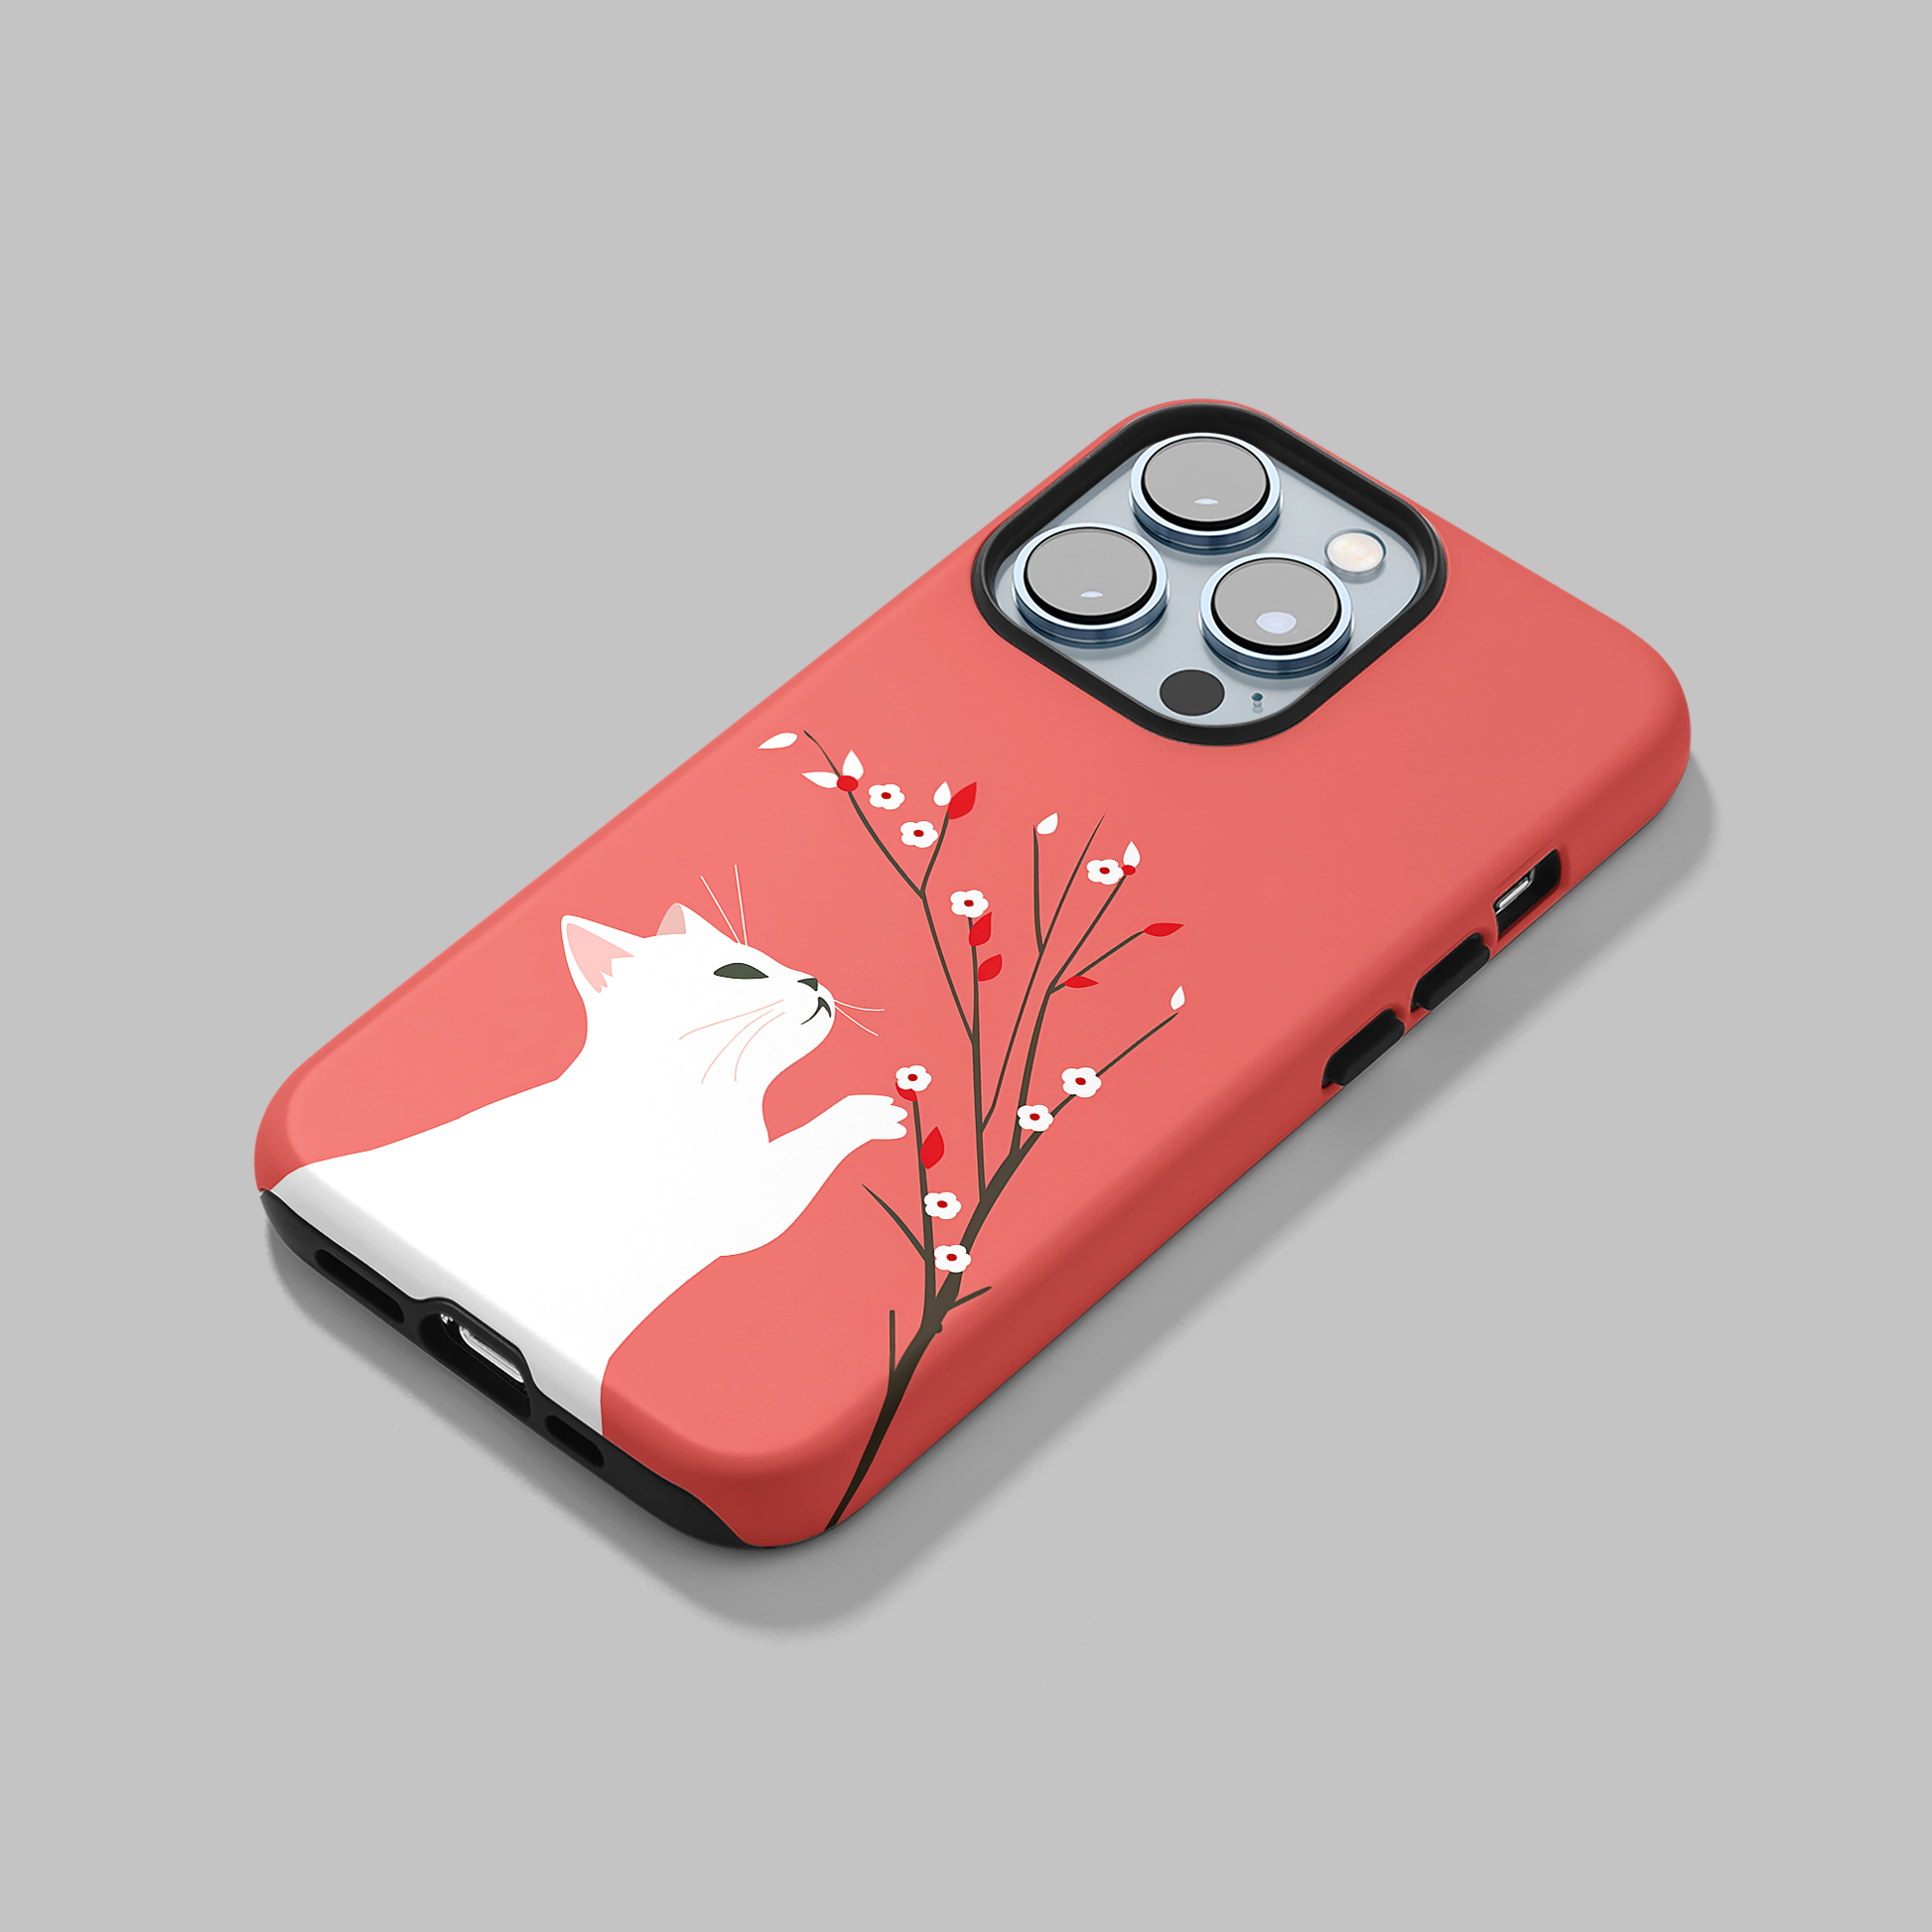 Back view of the Floral Feline iPhone Case on iPhone 13, showing full case design and camera cutout.